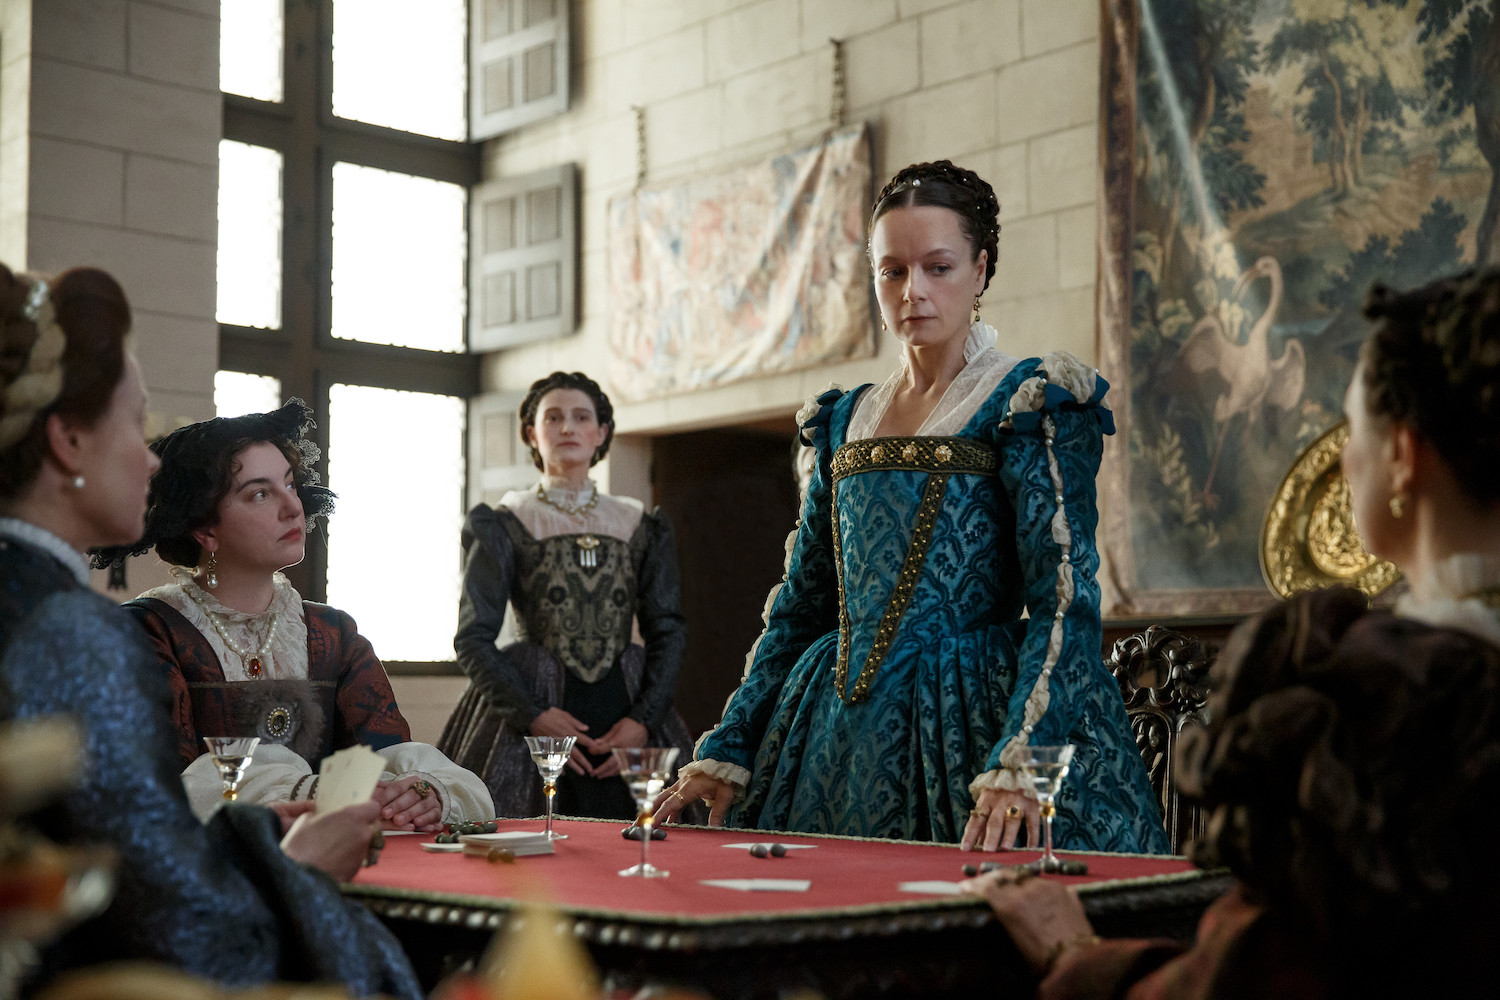 Picture Shows: Catherine (Samantha Morton) leaves the card game when she is insulted by Queen Eleanor (Rebecca Gethings).